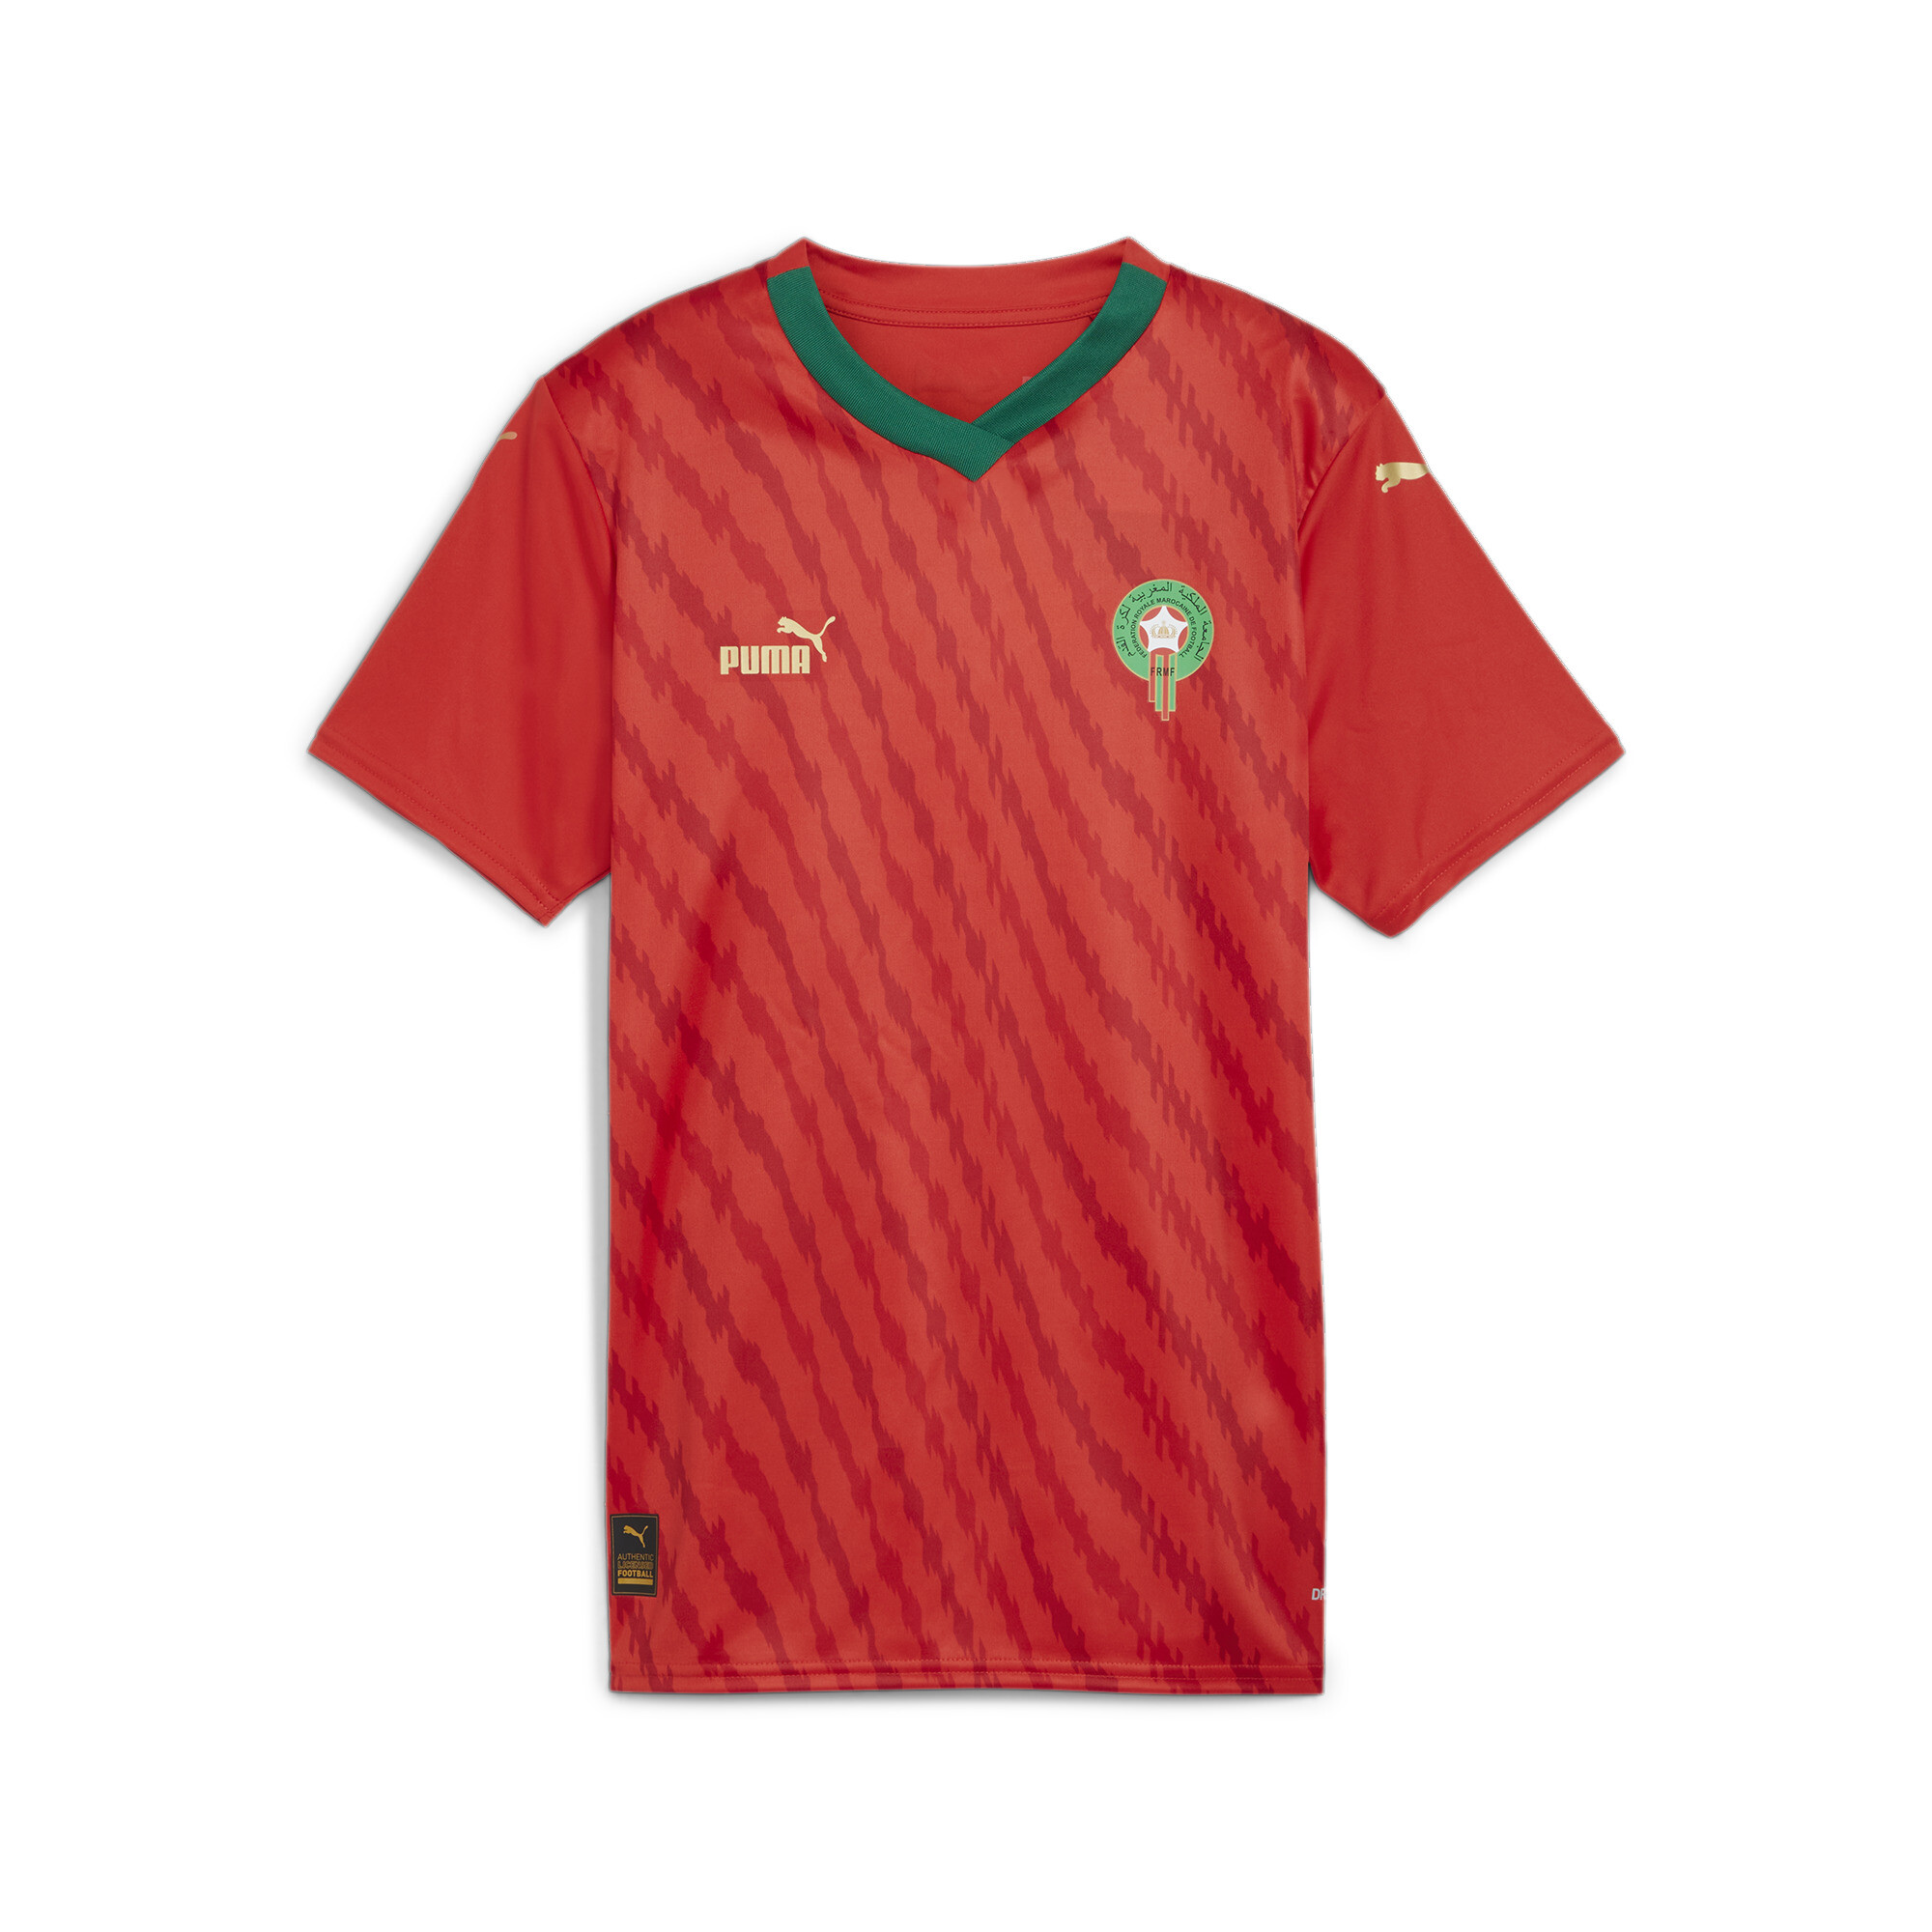 Women's PUMA Morocco 23/24 World Cup Home Jersey In Red, Size Medium